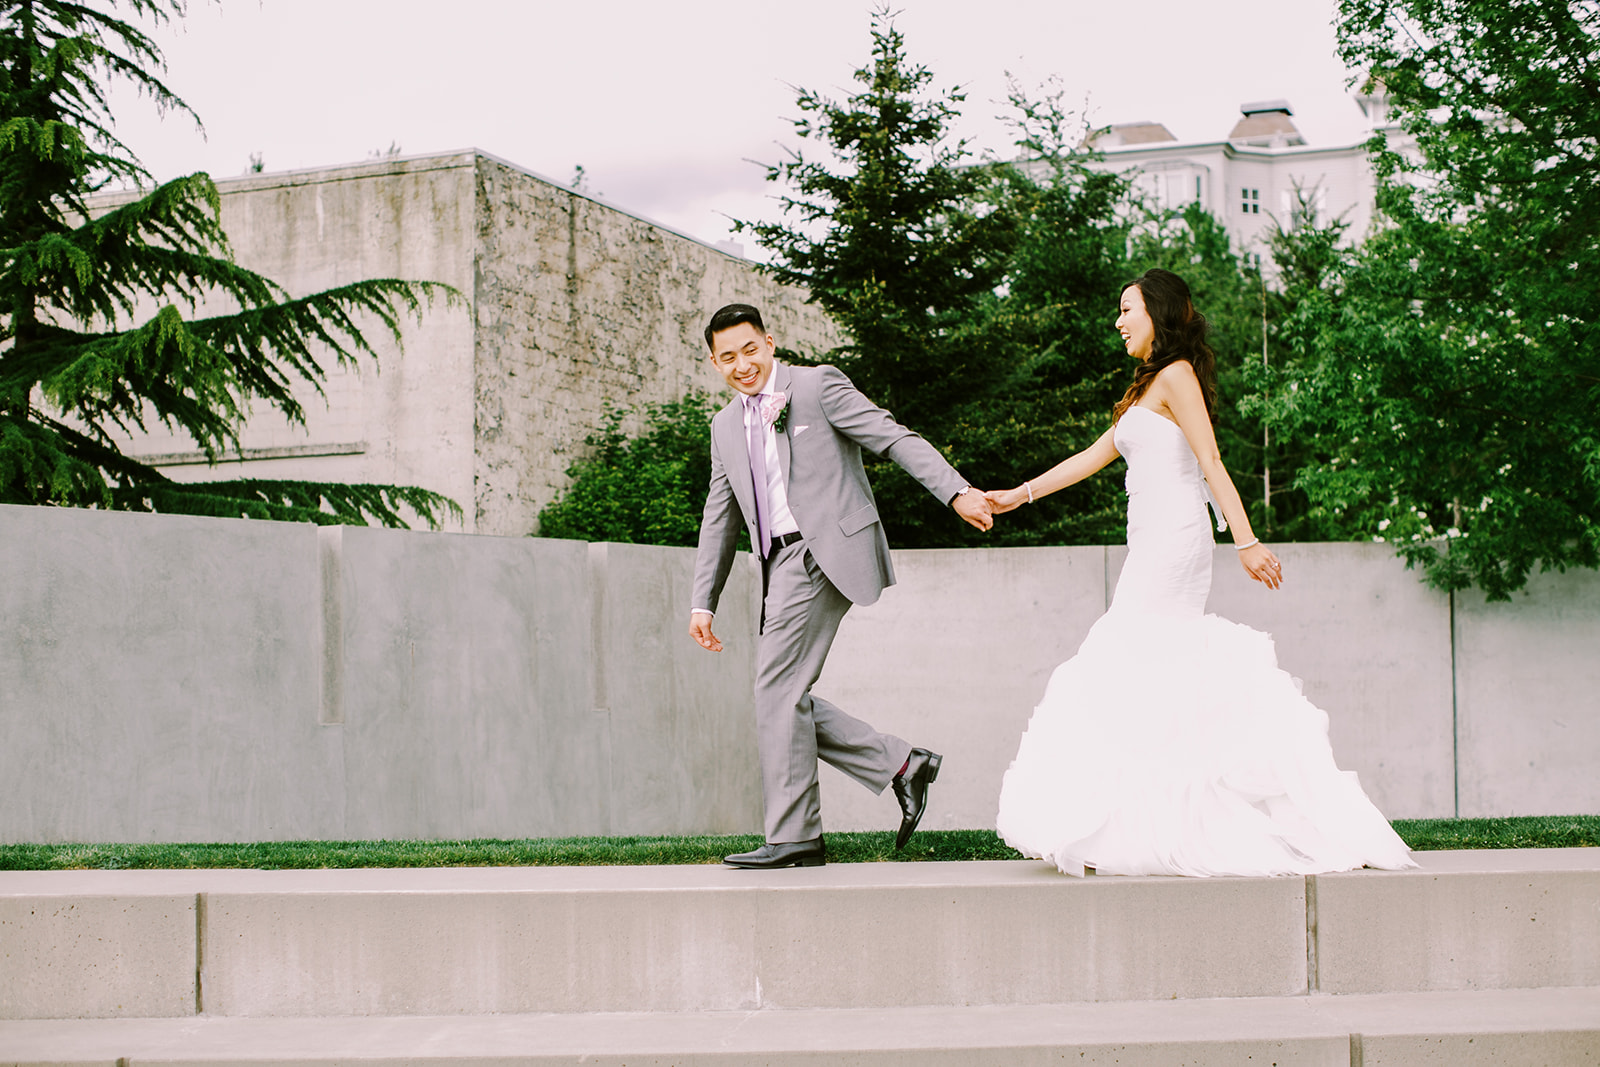 Bride and groom wedding portraits at the Olympic Sculpture Park summer of 2014